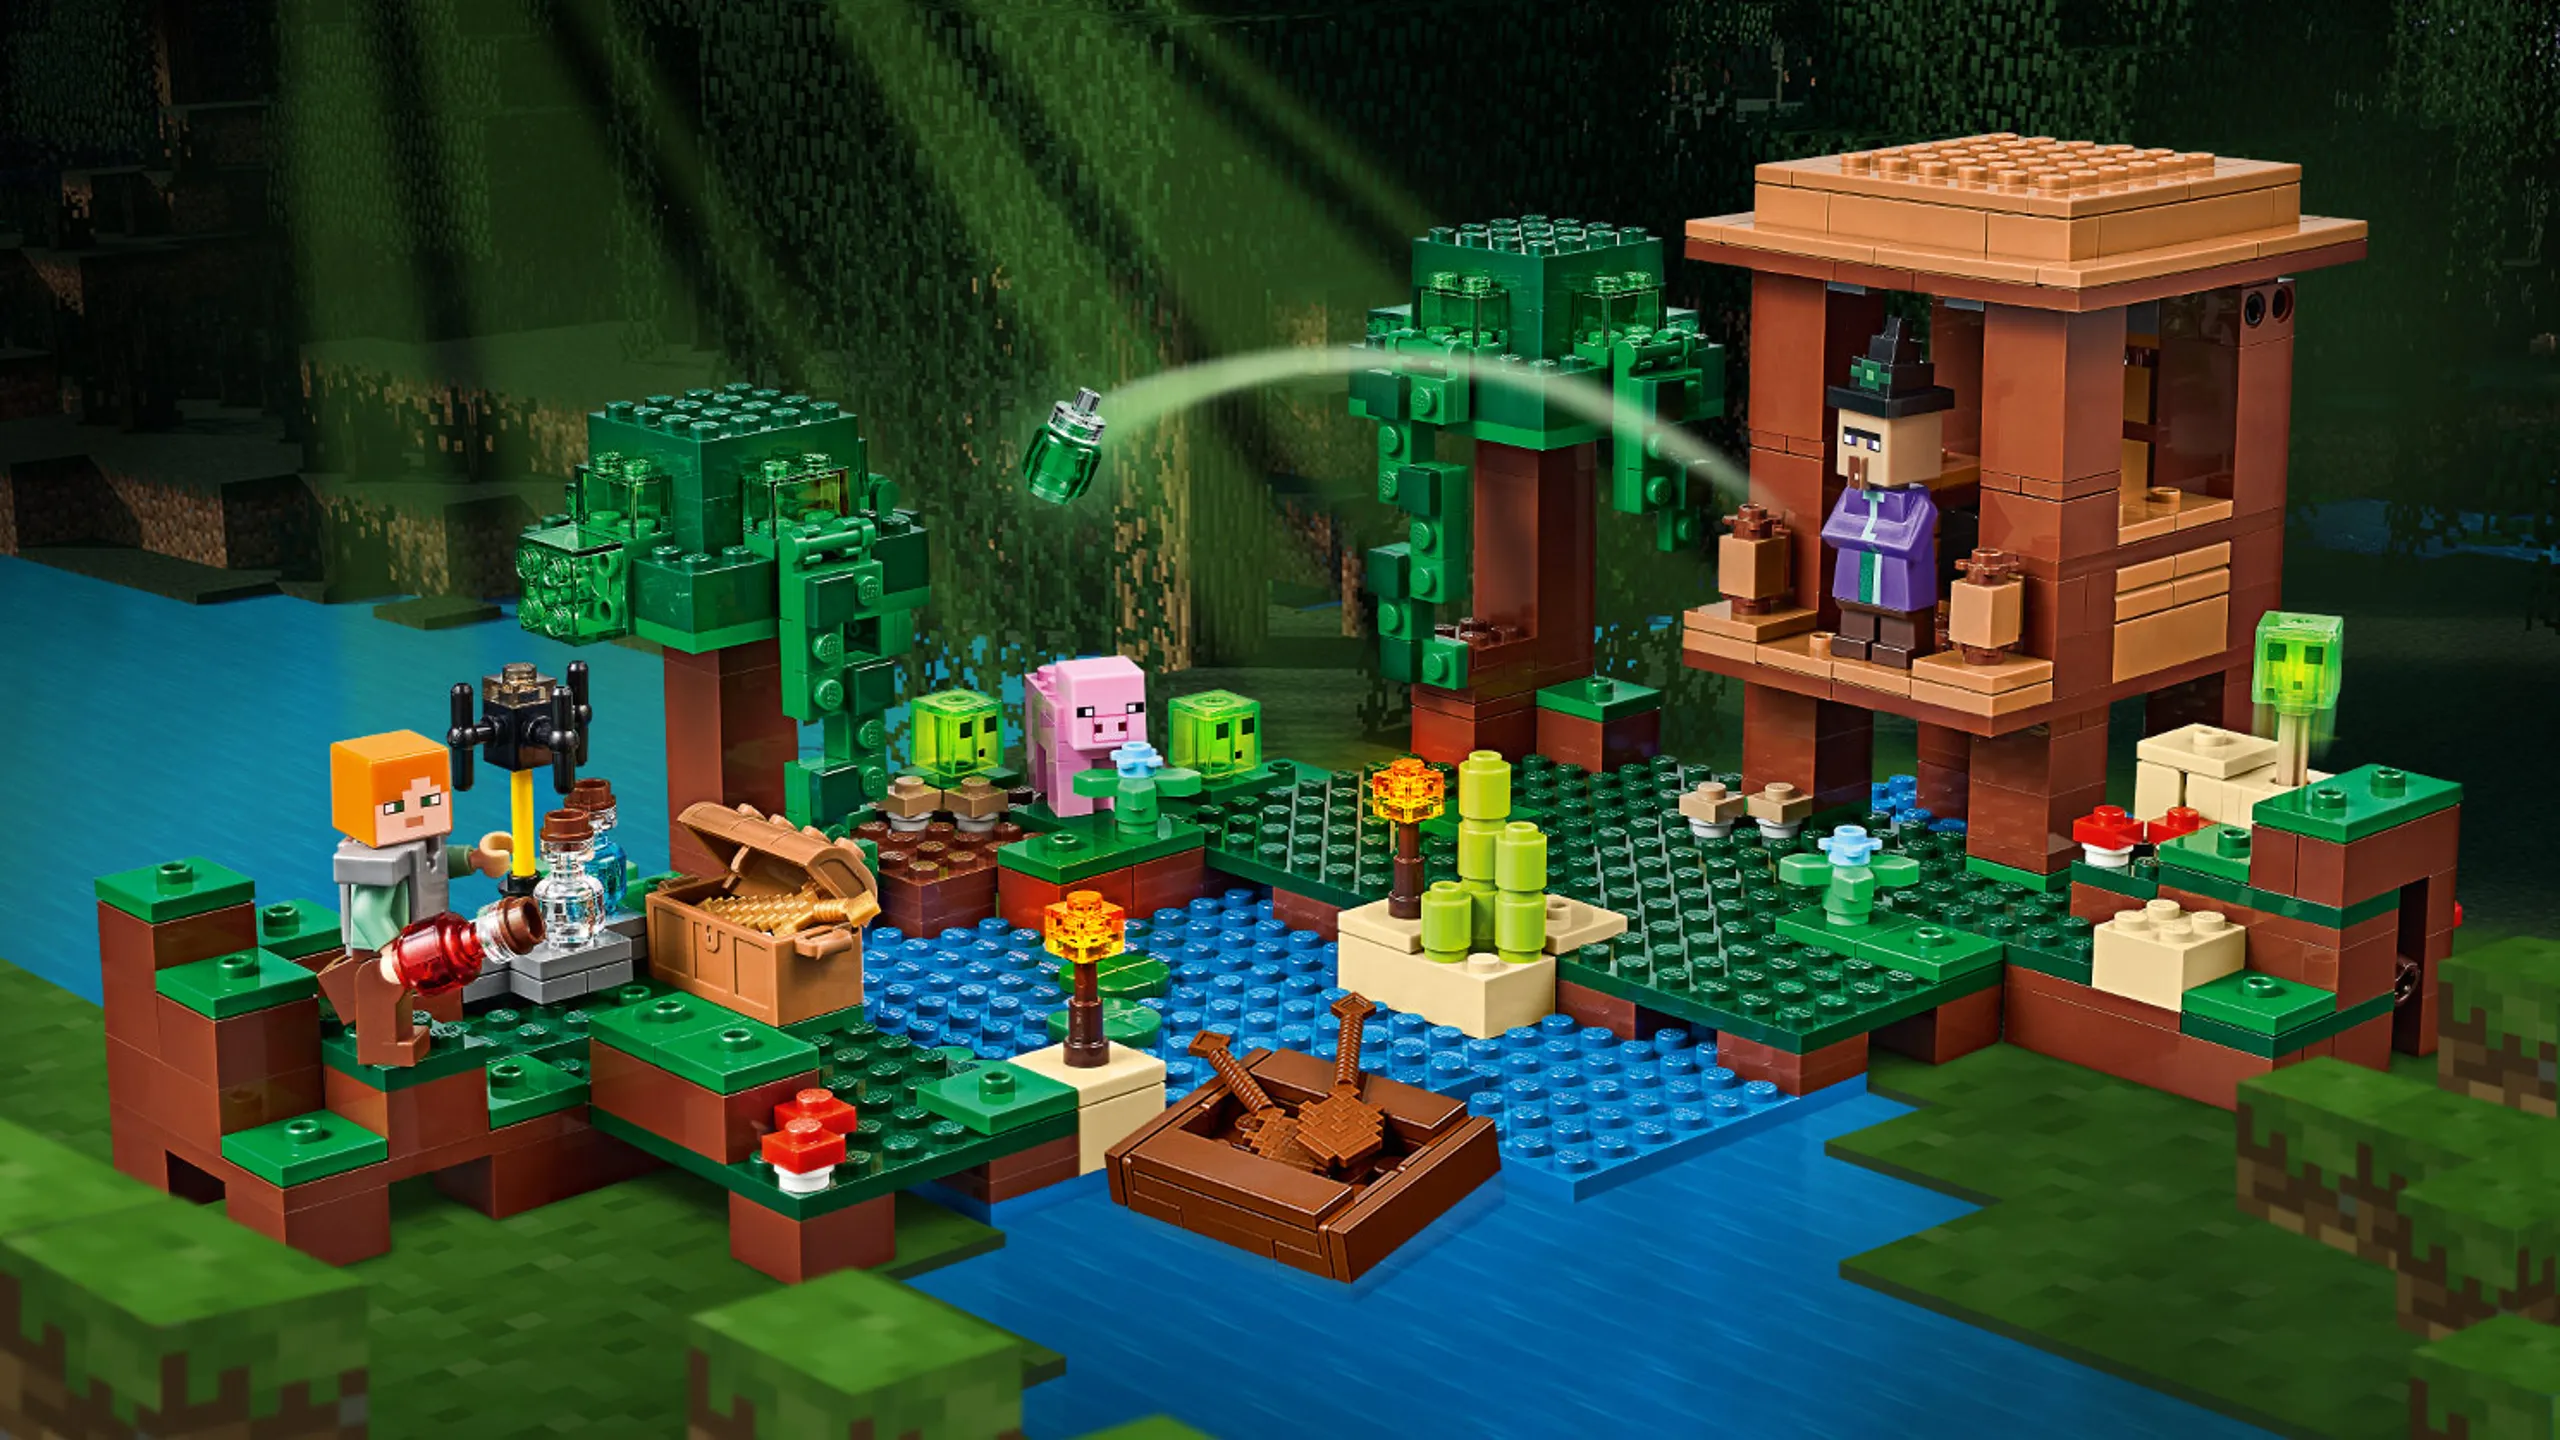 Lego Minecraft MOC: A Village House by the Water : r/Minecraft